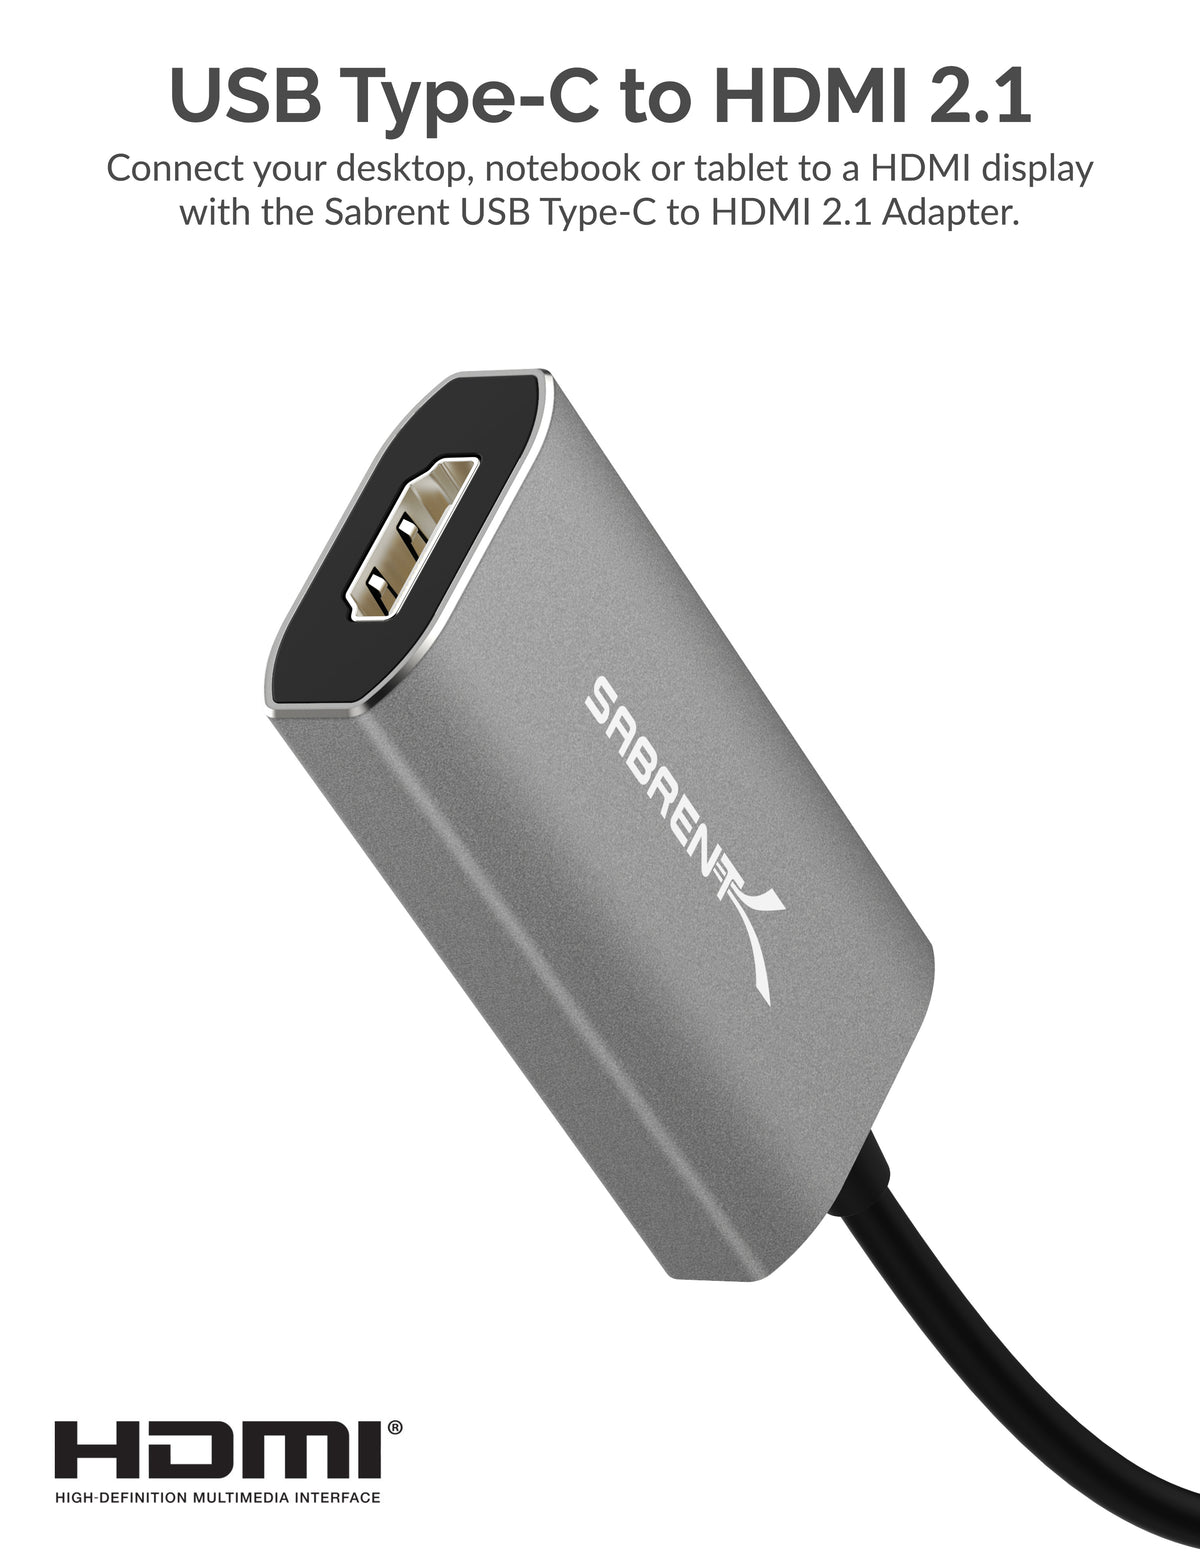 USB Type-C to HDMI 2.1 Adapter